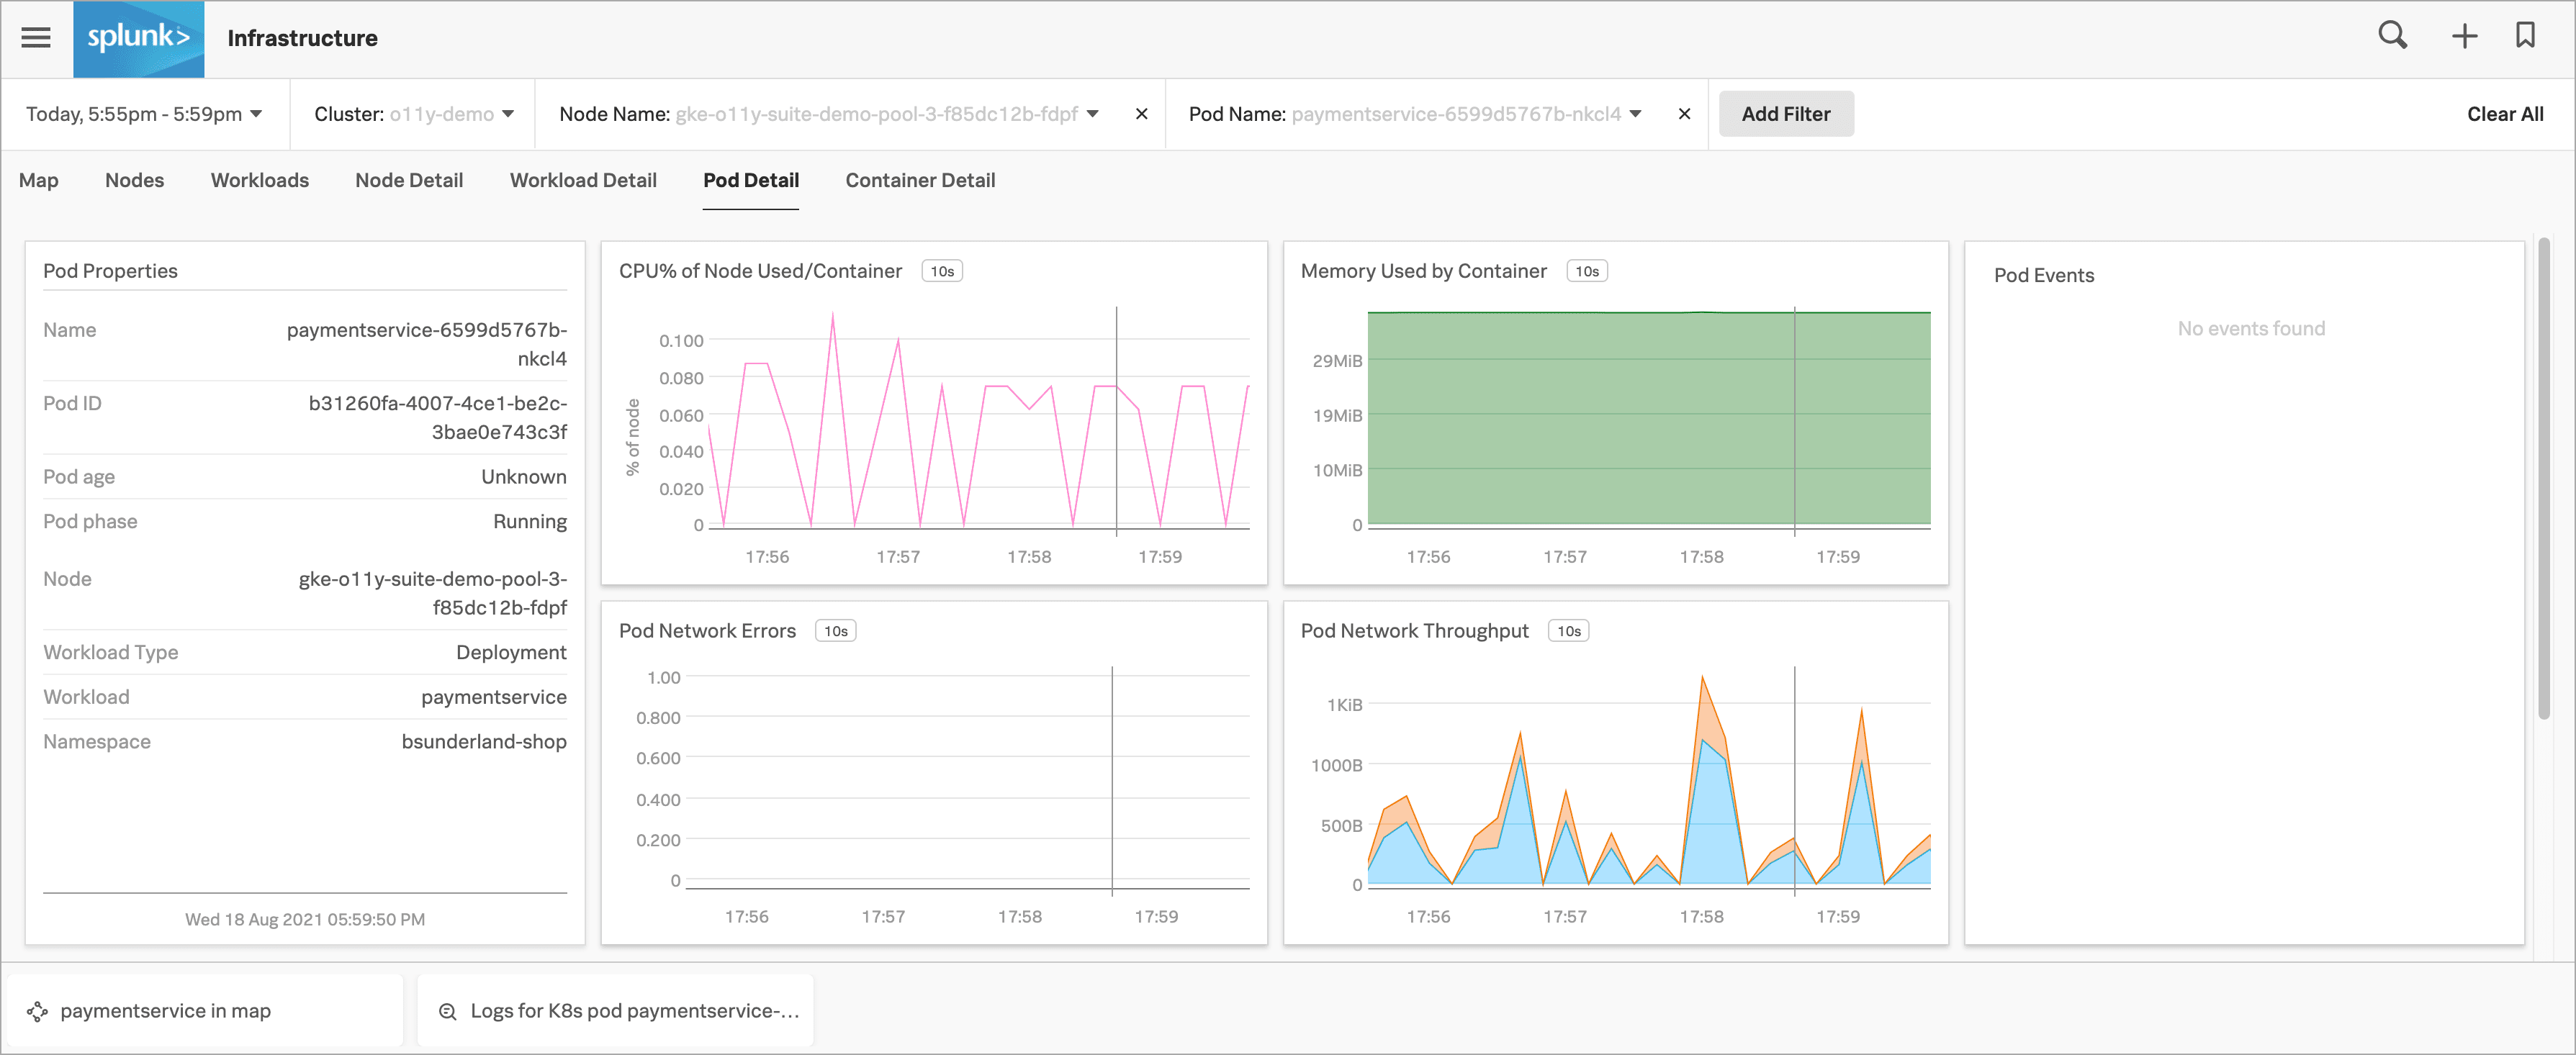 This screenshot shows the Kubernetes Pod Detail tab in Splunk Infrastructure Monitoring displaying metrics that indicate the pod is stable.